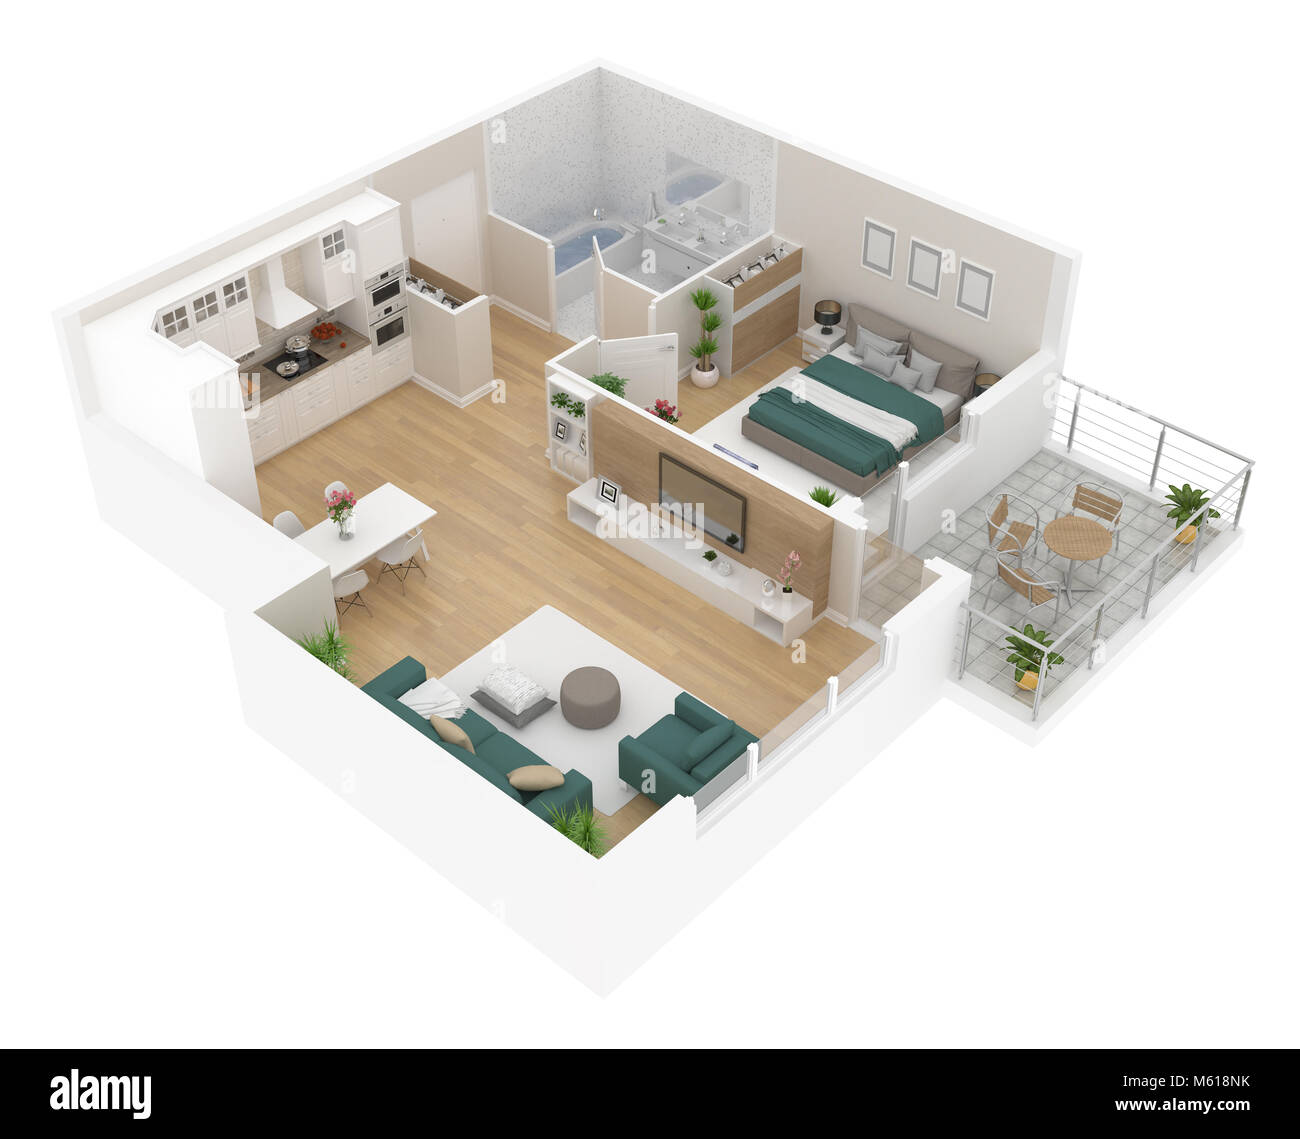 Floor plan top view. Apartment interior isolated on white background. 3D render Stock Photo